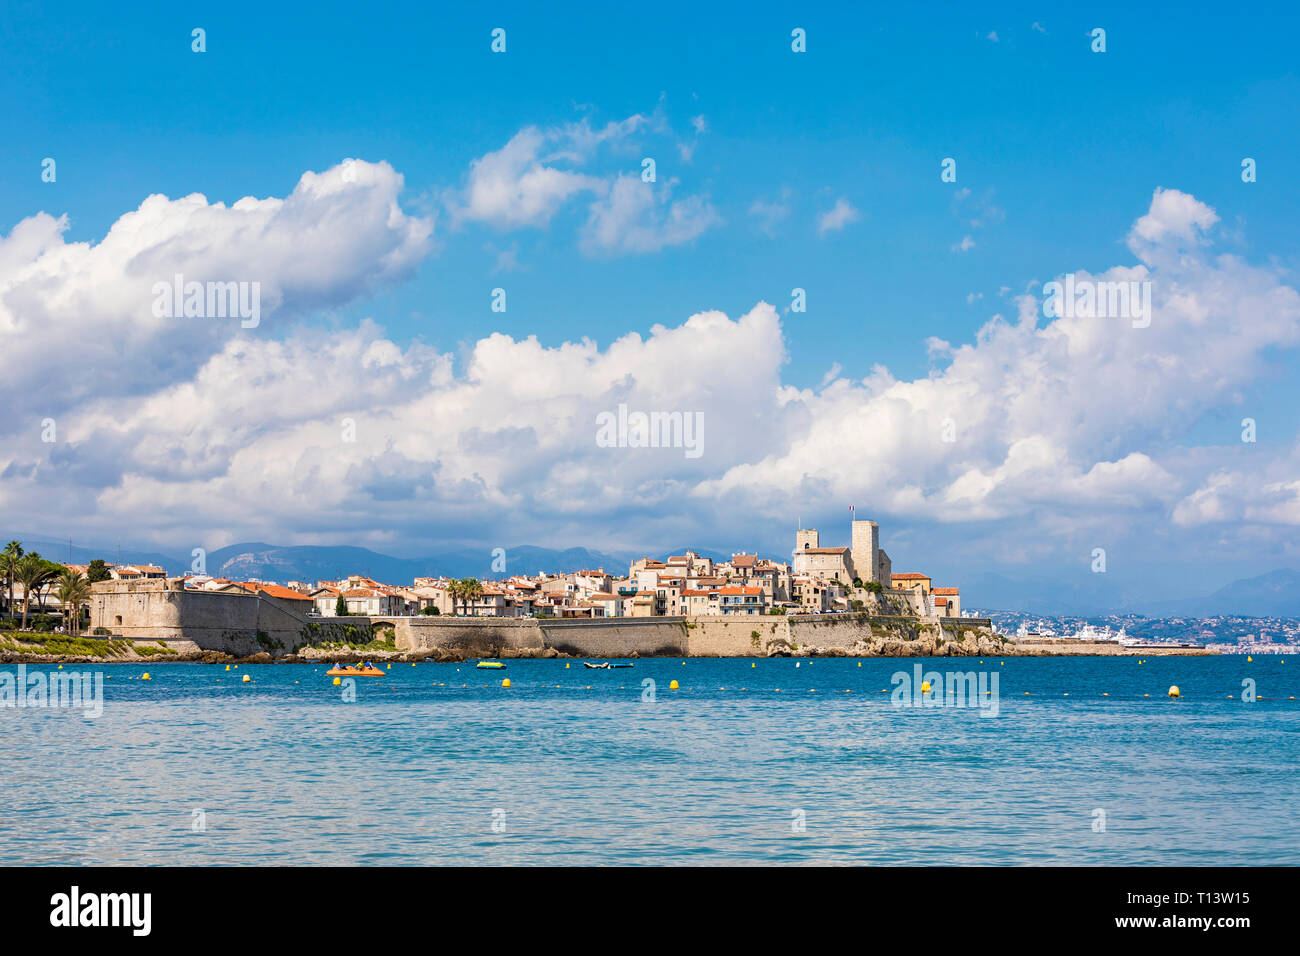 France, Provence-Alpes-Cote d'Azur, Antibes, Old town with Chateau Grimaldi, city wall Stock Photo